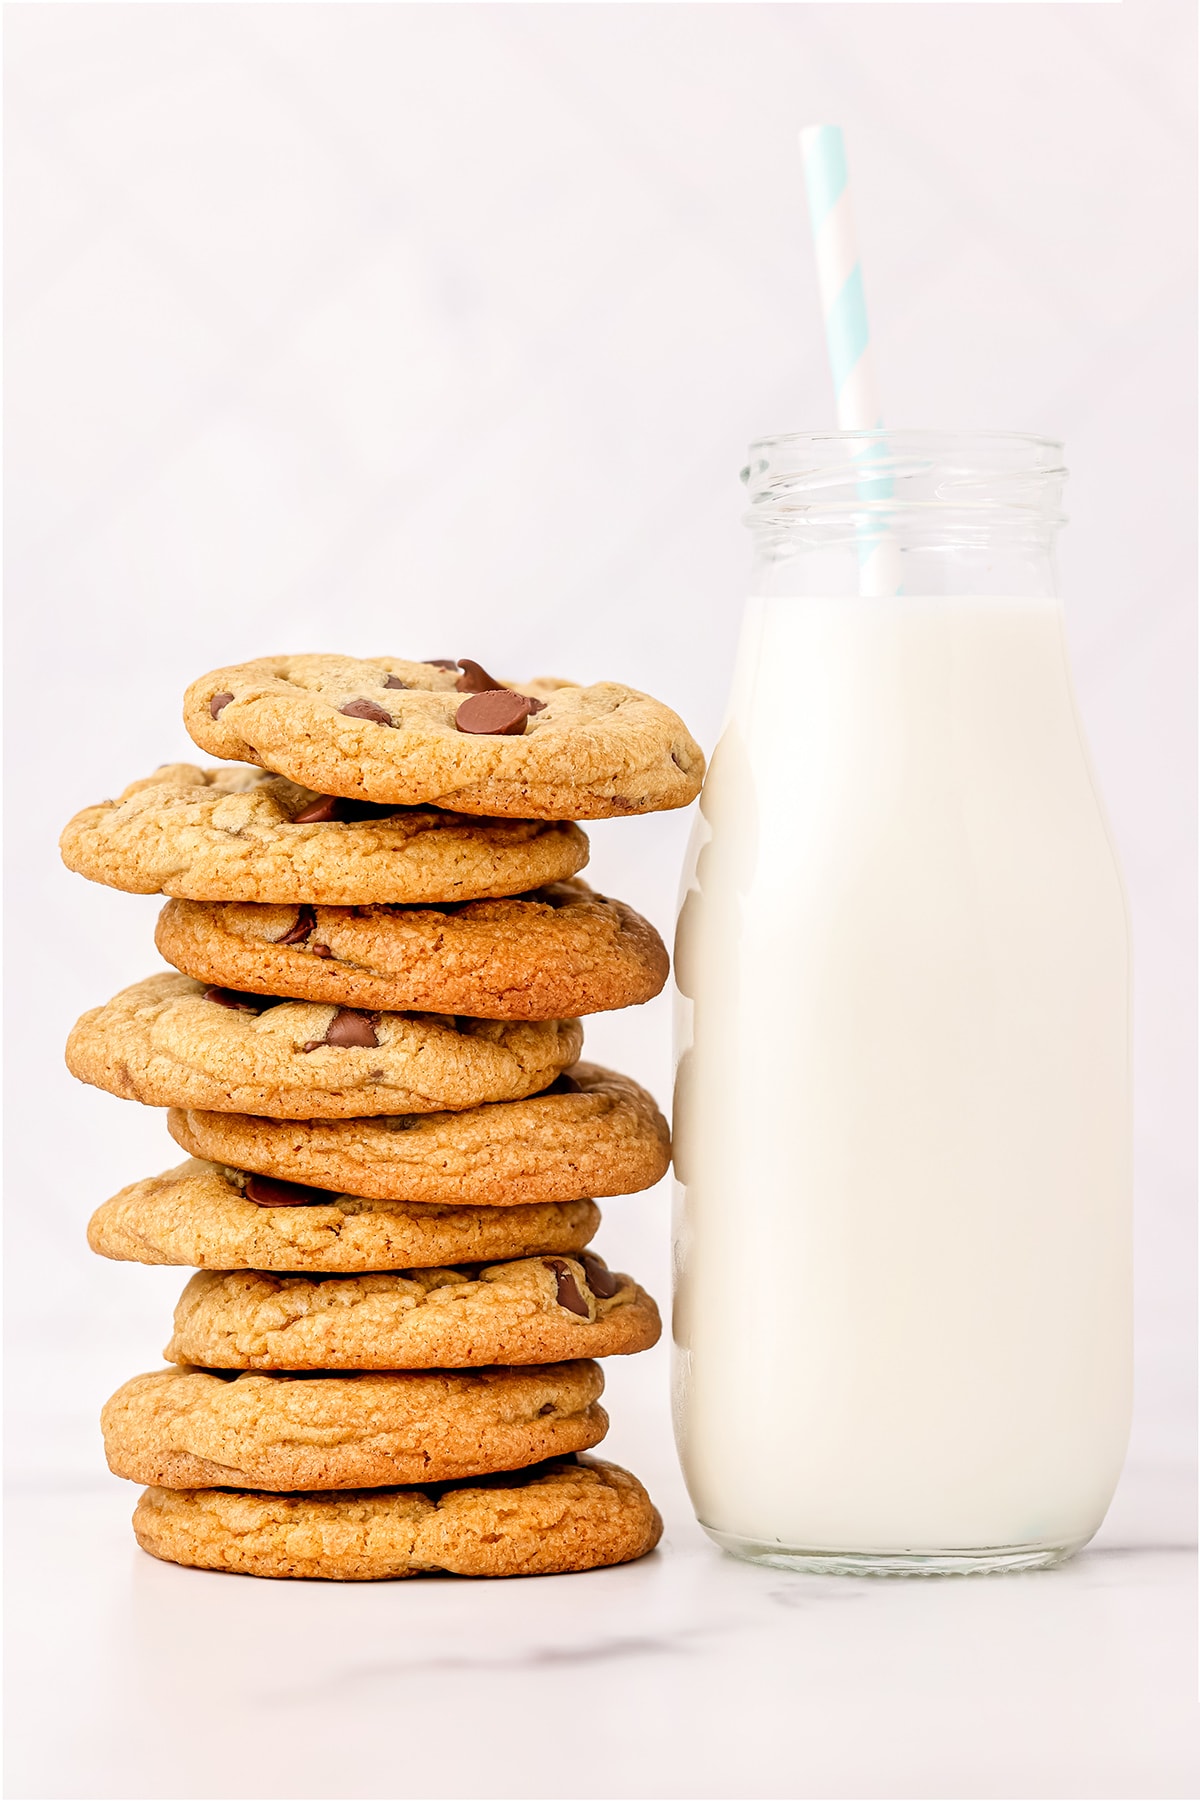 A large tower of chocolate chip cookies stacked on top of each other leaning next to a tall glass of milk with a blue striped straw.